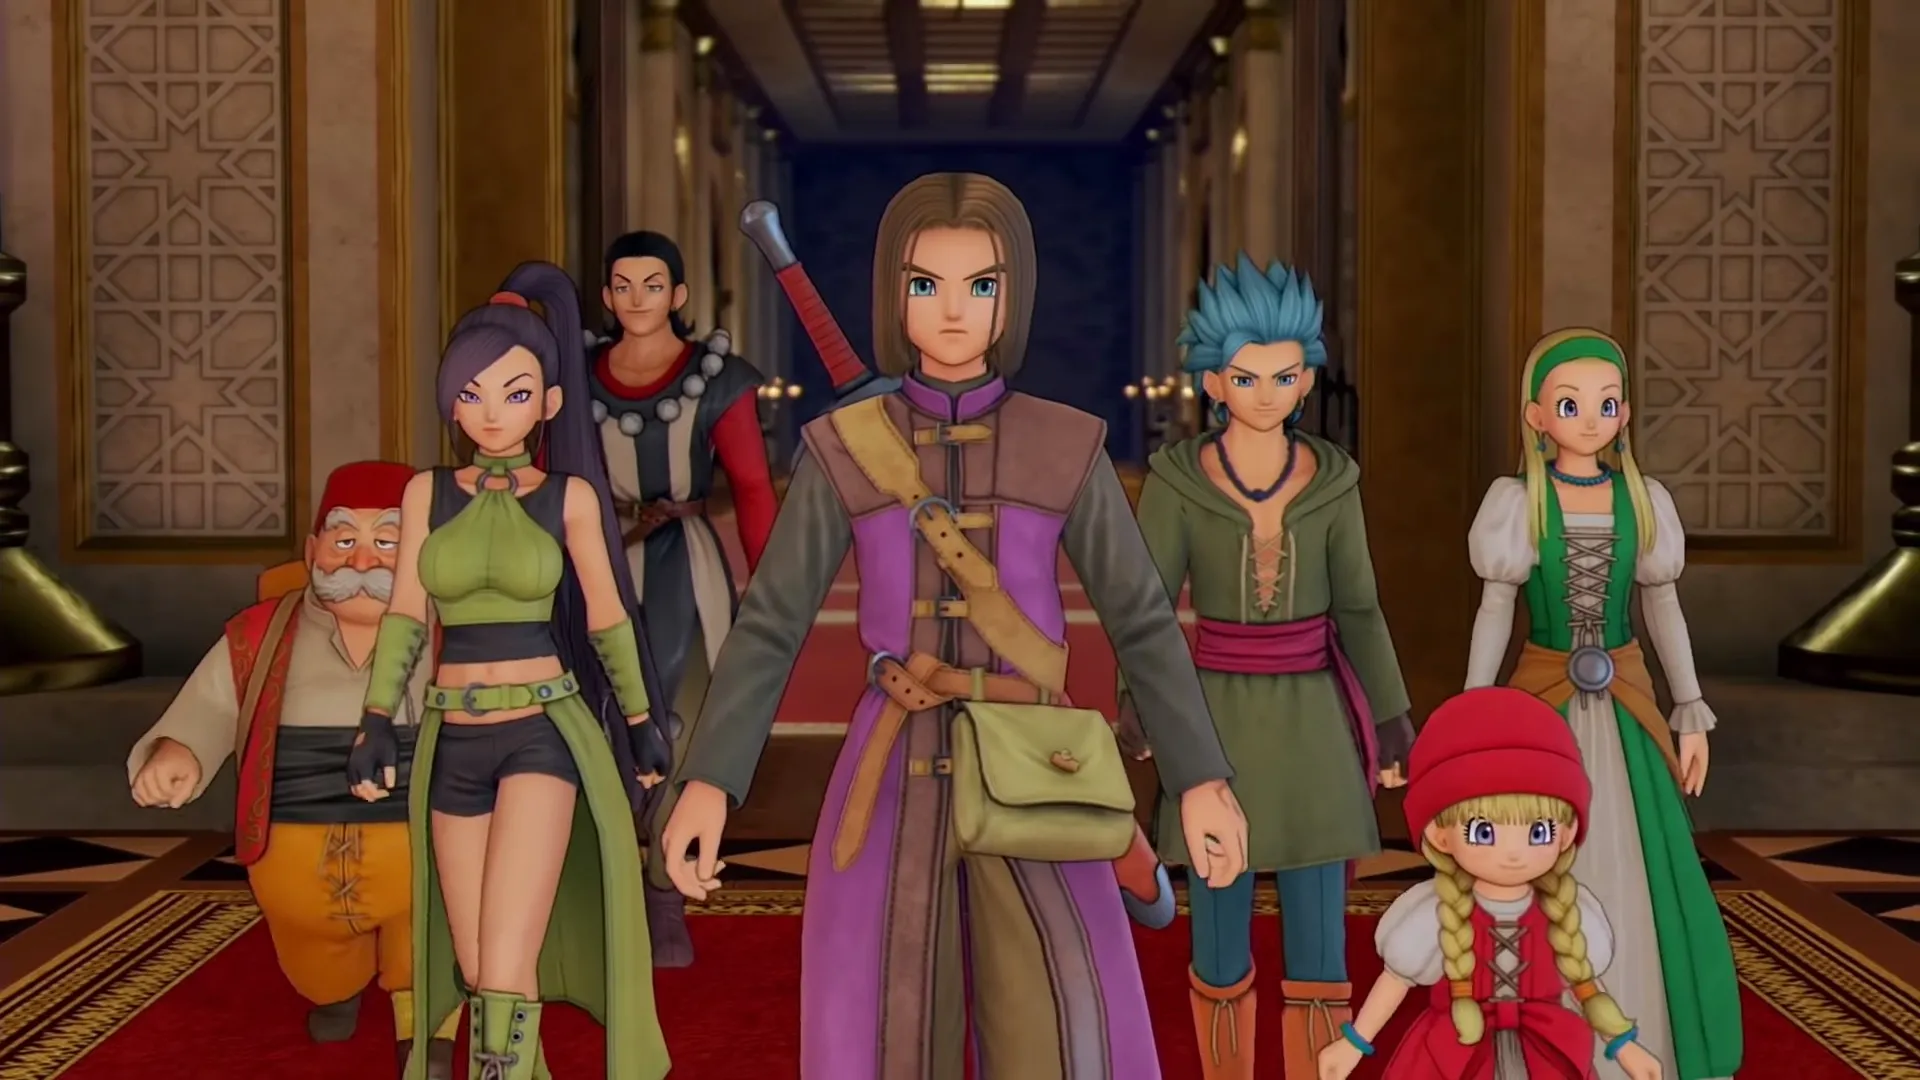 Dragon Quest XI S" New Trailer Streamed at TGS 2020.